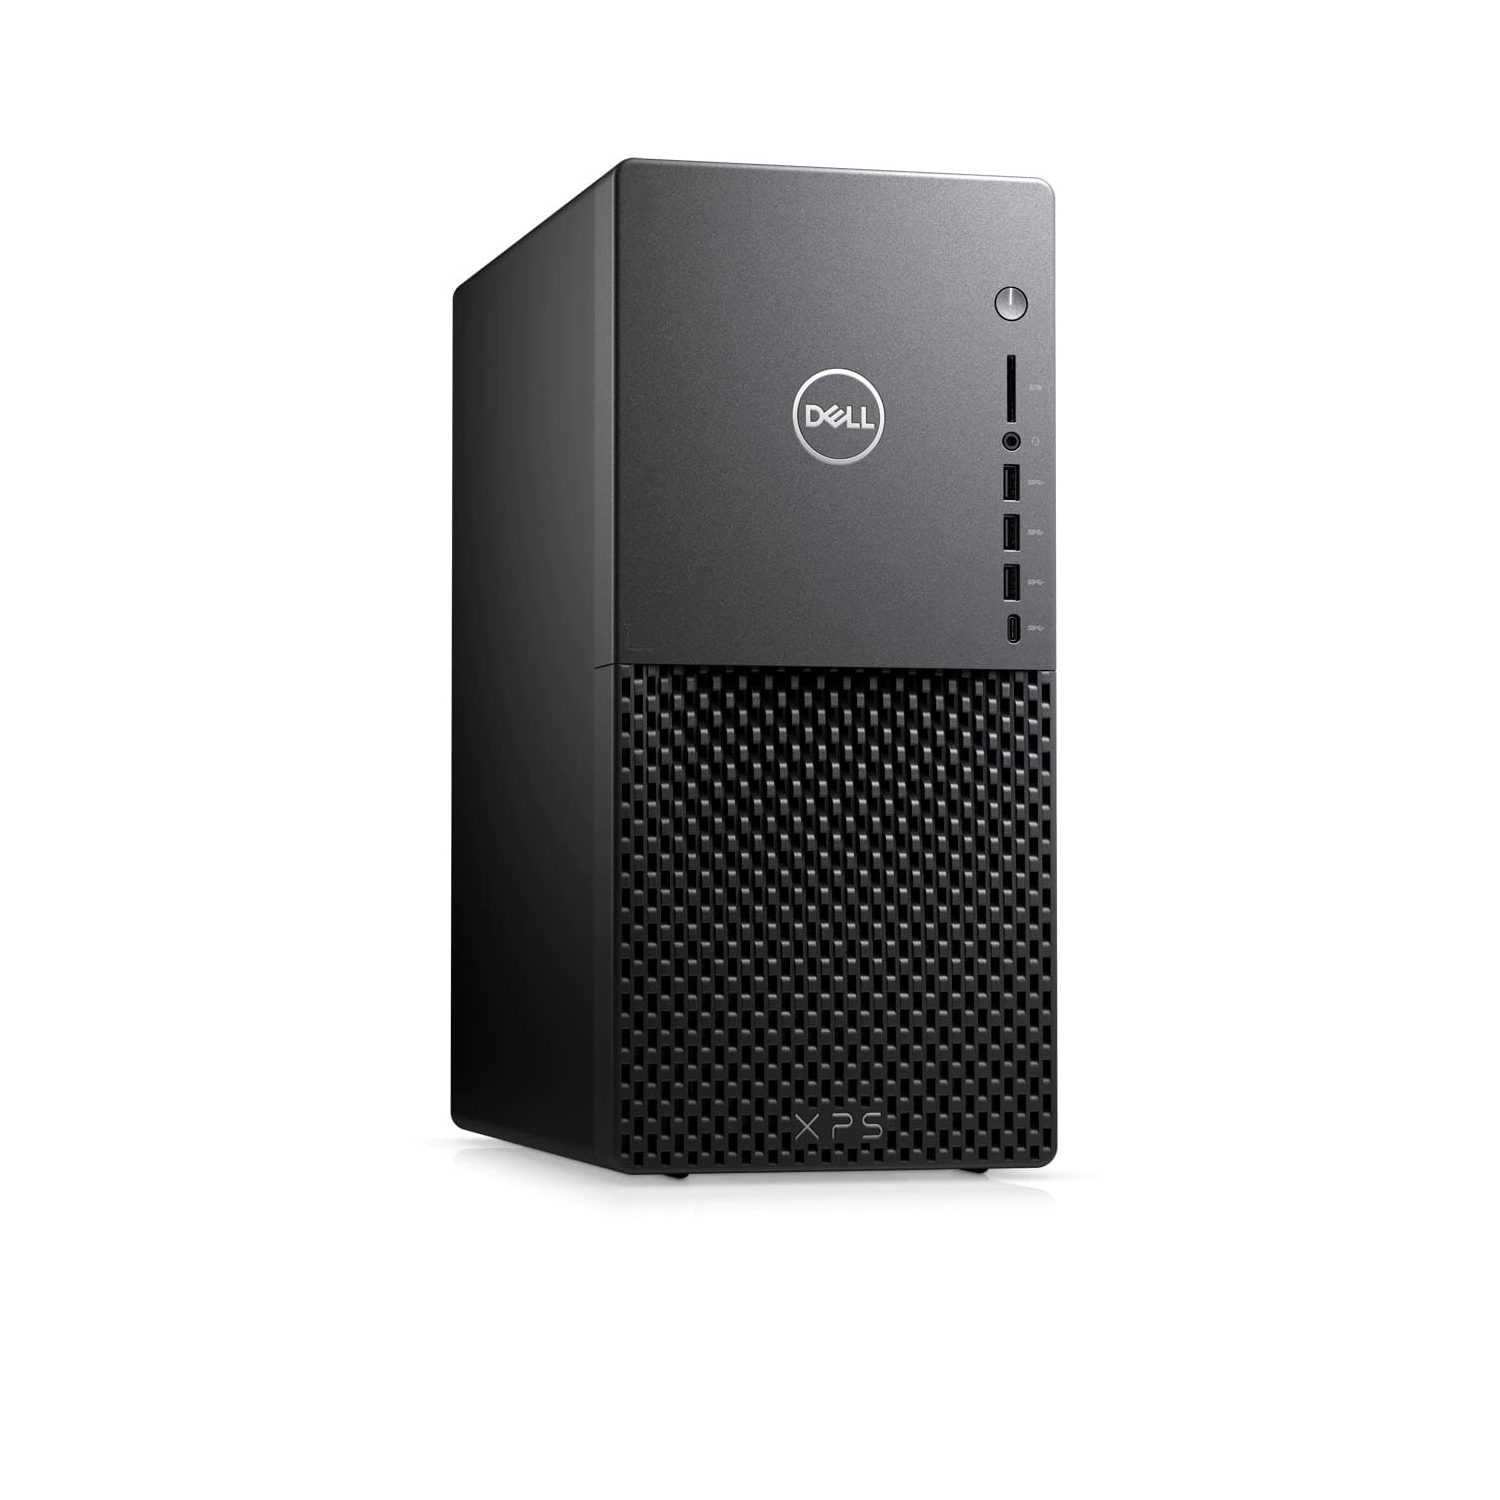 Refurbished (Excellent) - Dell XPS 8940 Desktop (2020) | Core i7 - 2TB HDD + 256GB SSD - 32GB RAM - GT 1030 | 8 Cores @ 4.9 GHz - 11th Gen CPU Certified Refurbished